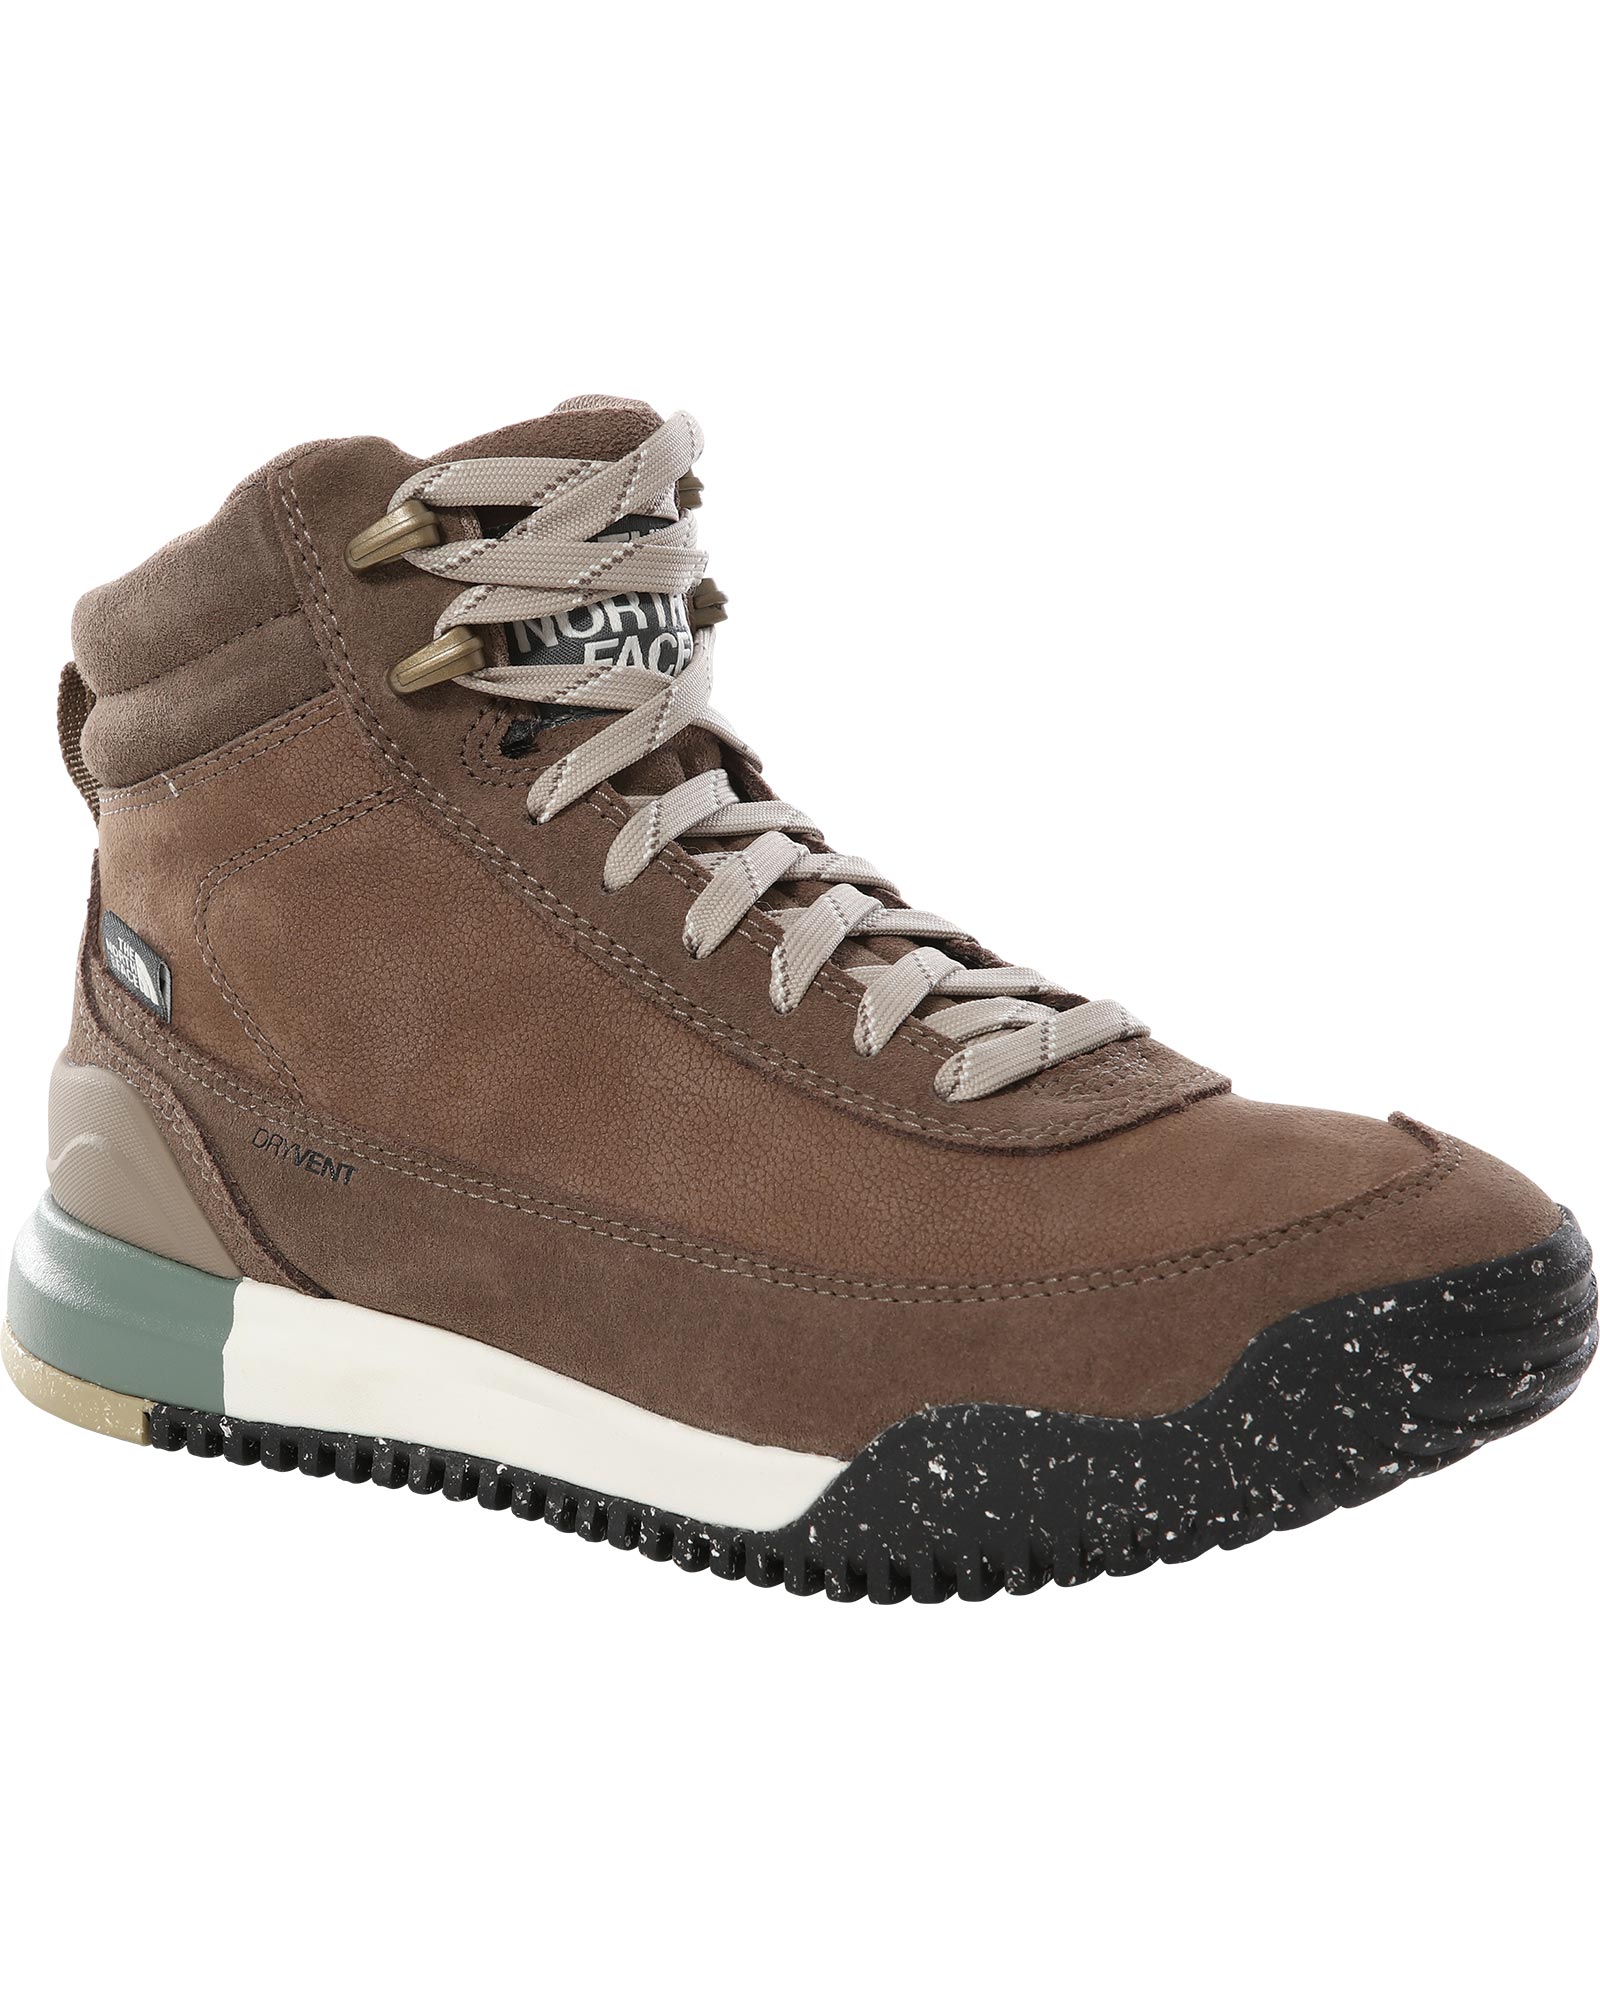 The North Face Back to Berkeley III Leather Women’s Waterproof Boots - Fossil/Gardenia White UK 4